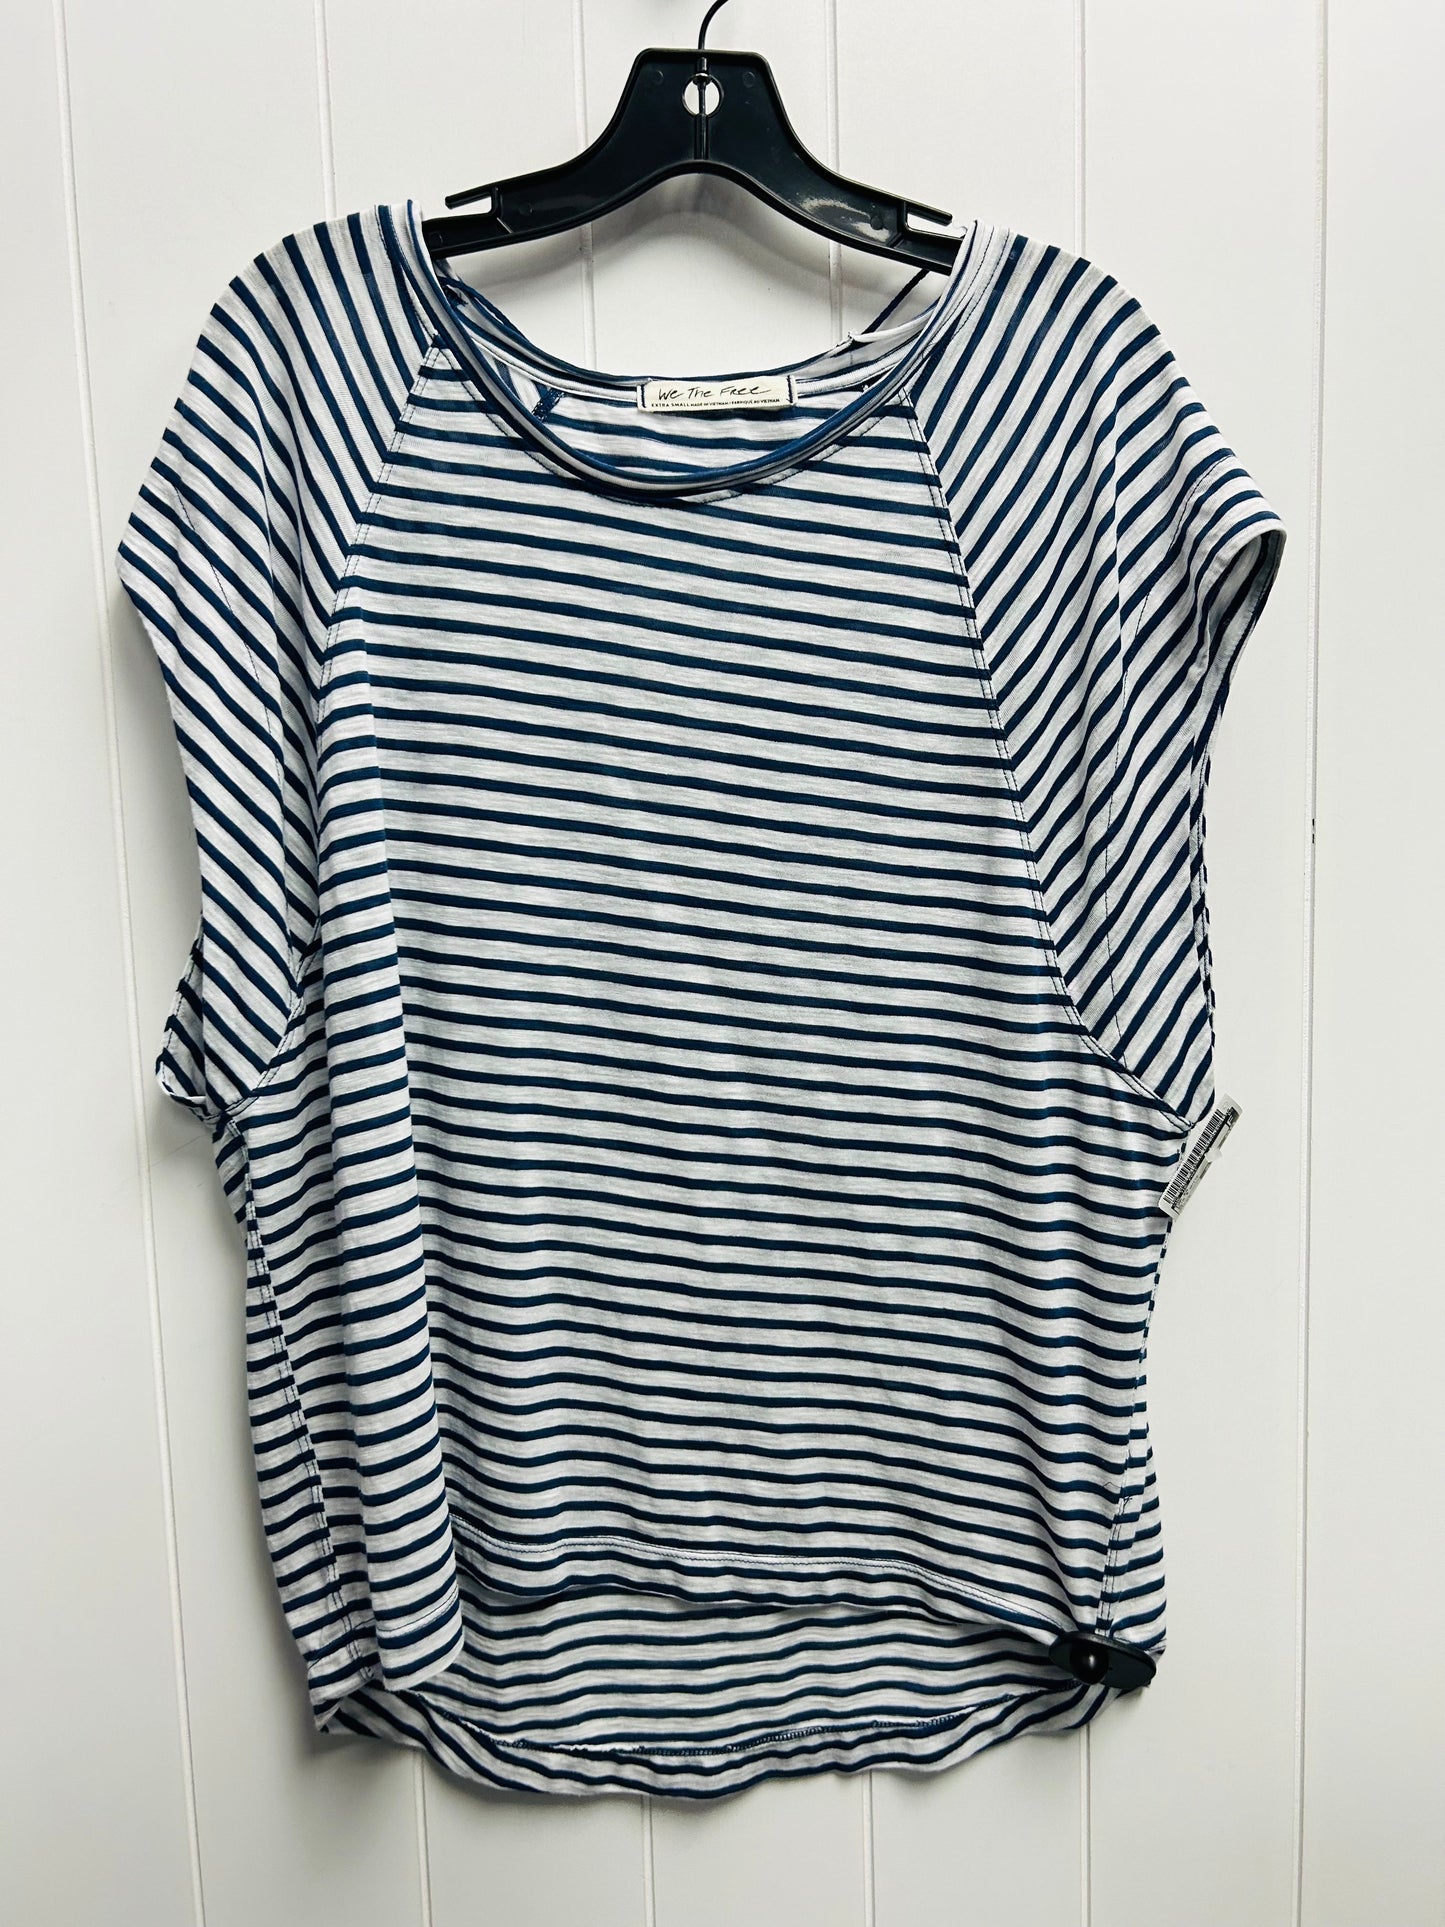 Blue & White Top Short Sleeve We The Free, Size Xs